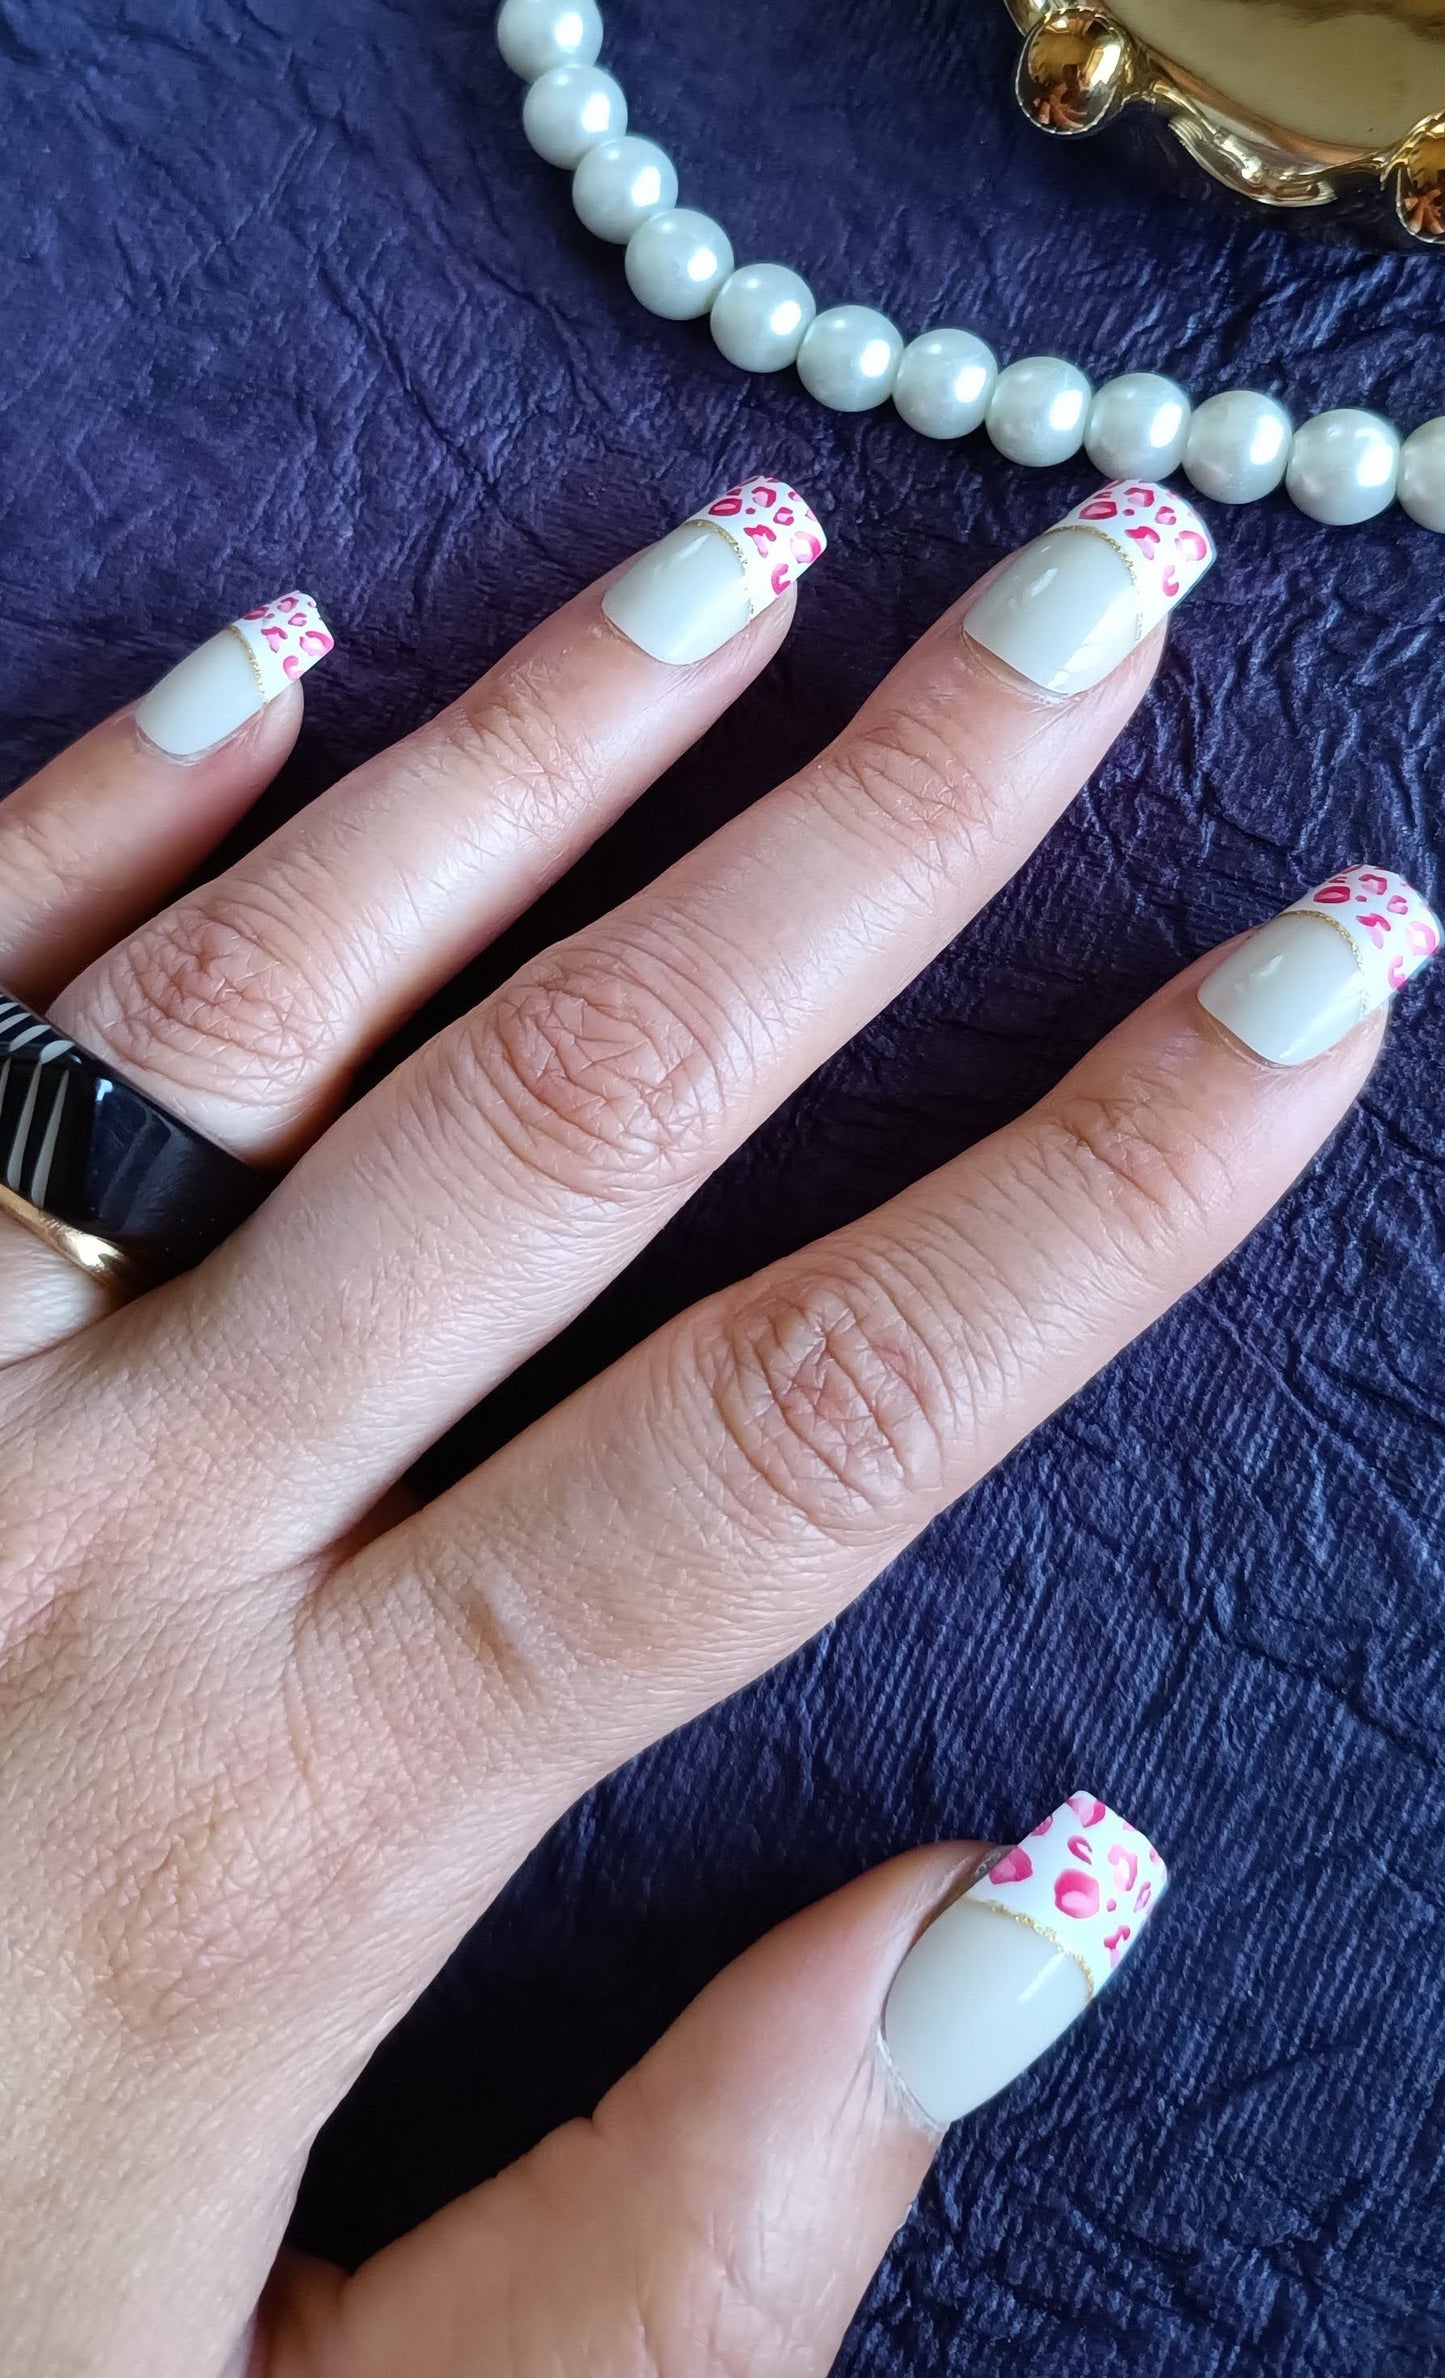 Acrylic/ Press-on Designer Nails with Glue Tabs | Artificial Nails Under 50  - Red-White French Tips